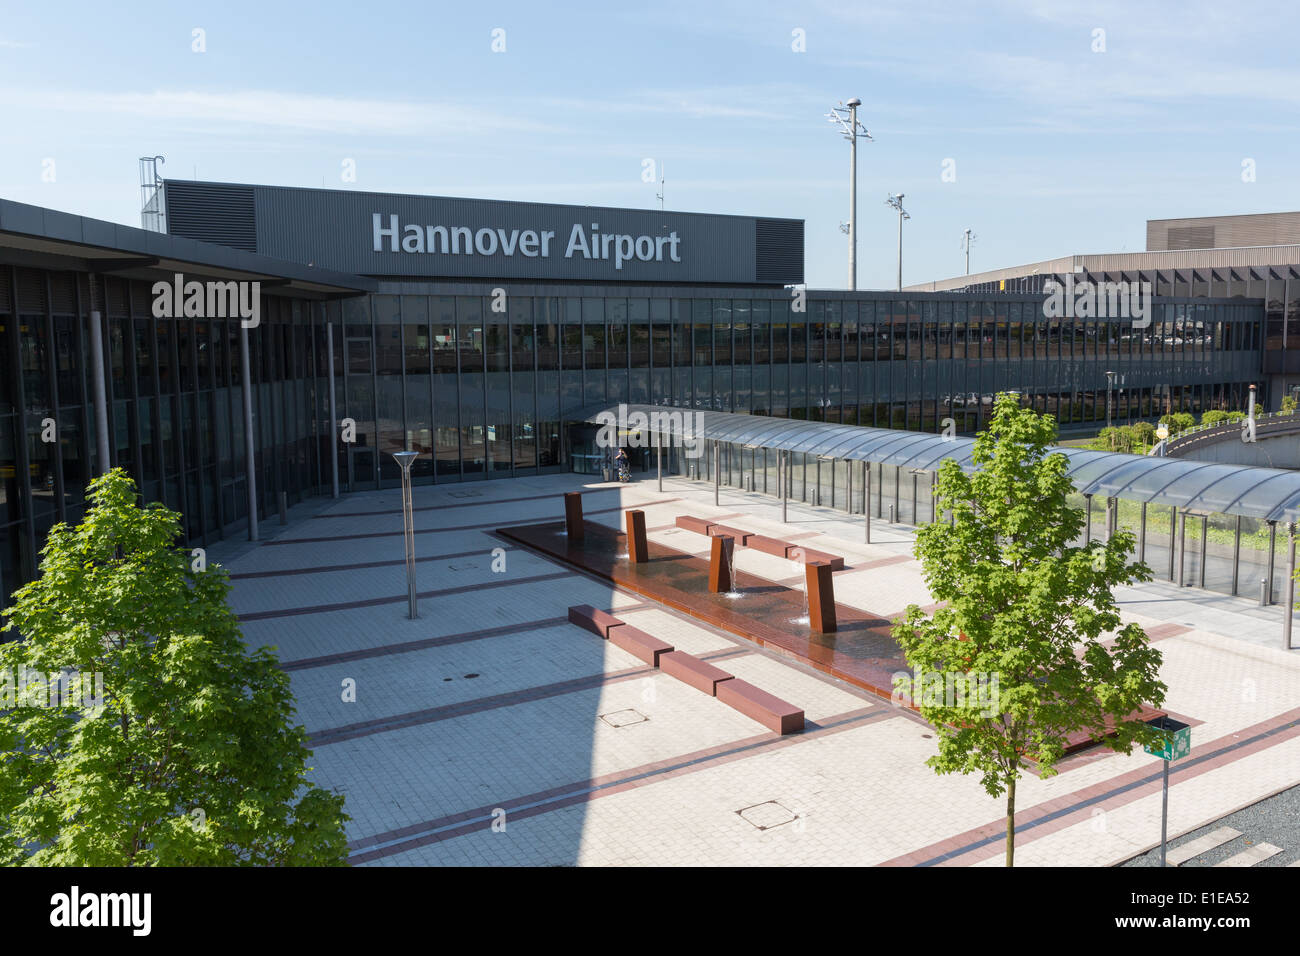 The terminal building at Hannover Airport, Germany Stock Photo - Alamy